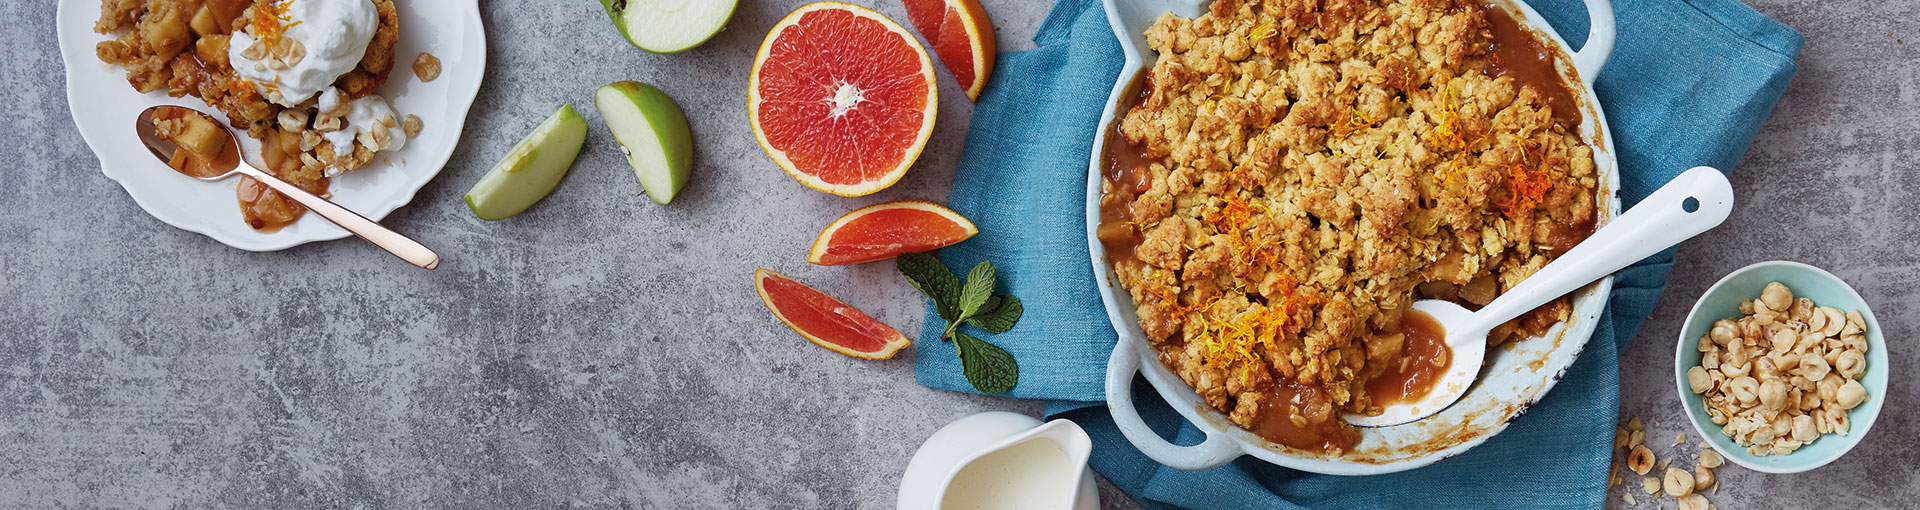 Apple and Citrus Crumble